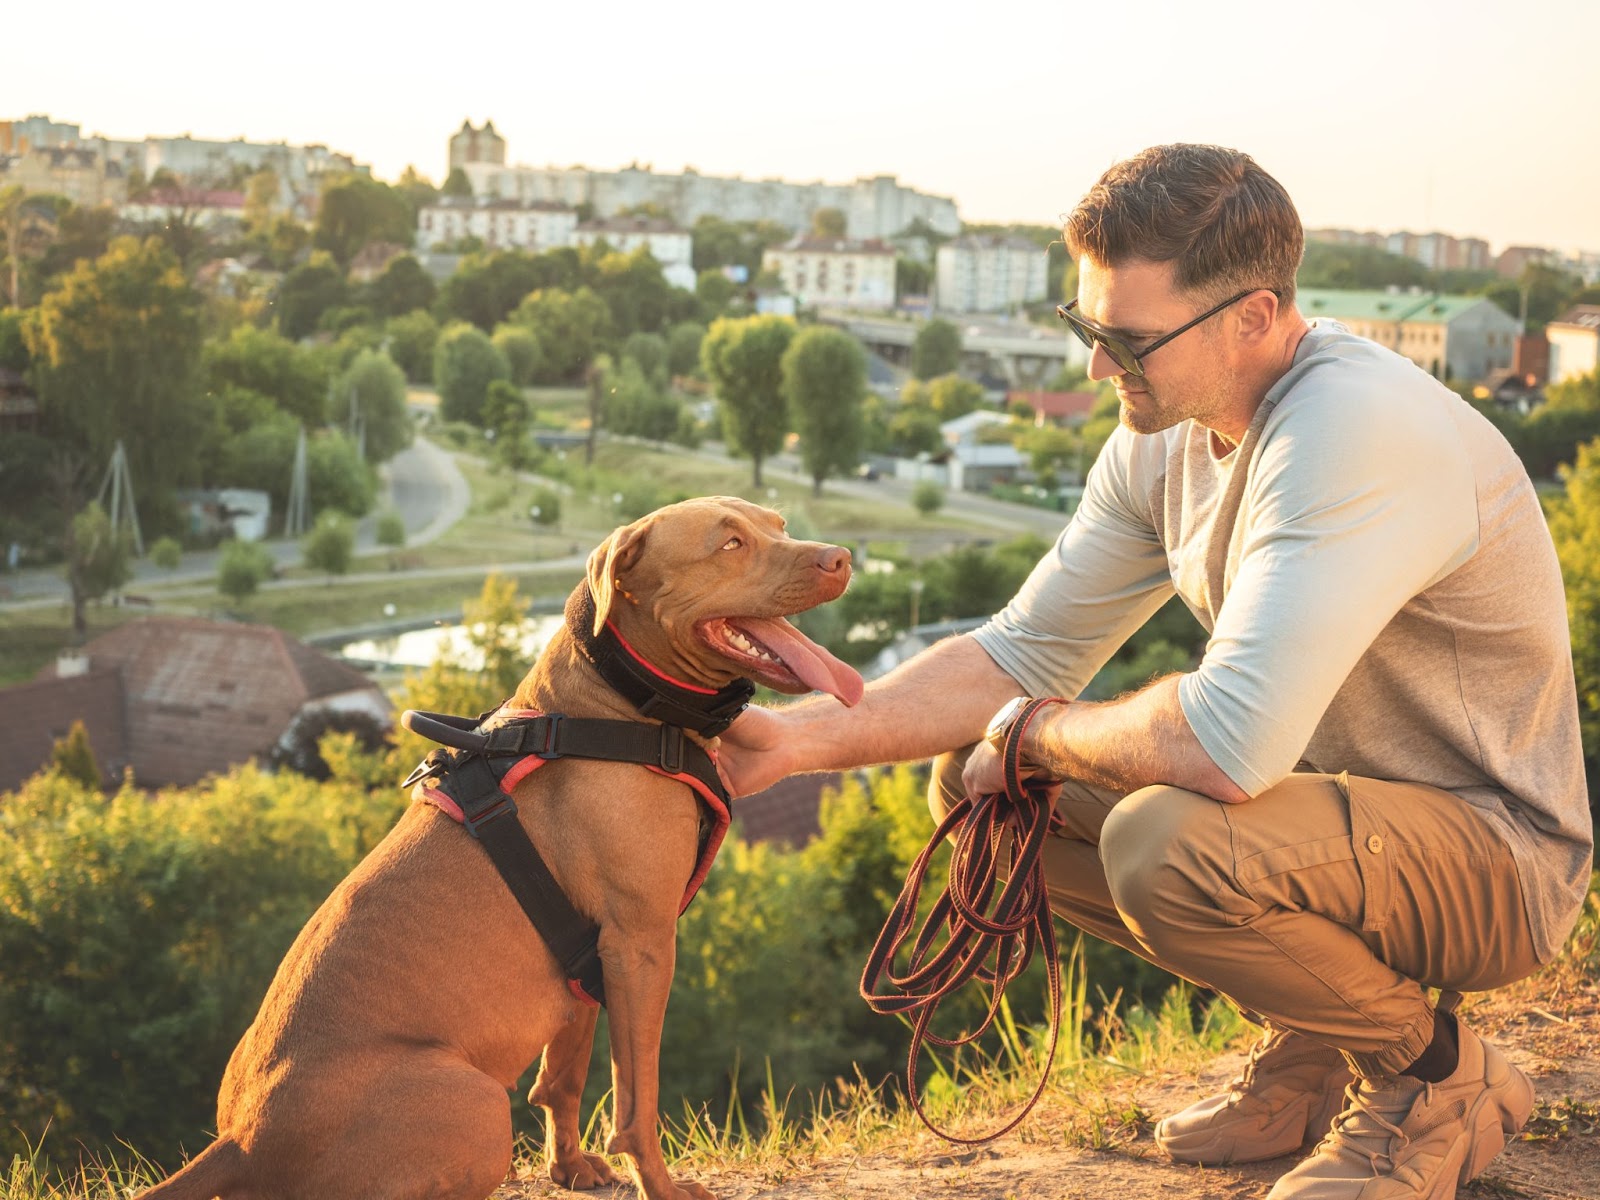 Man and brown dog bonding outdoors with town in background.